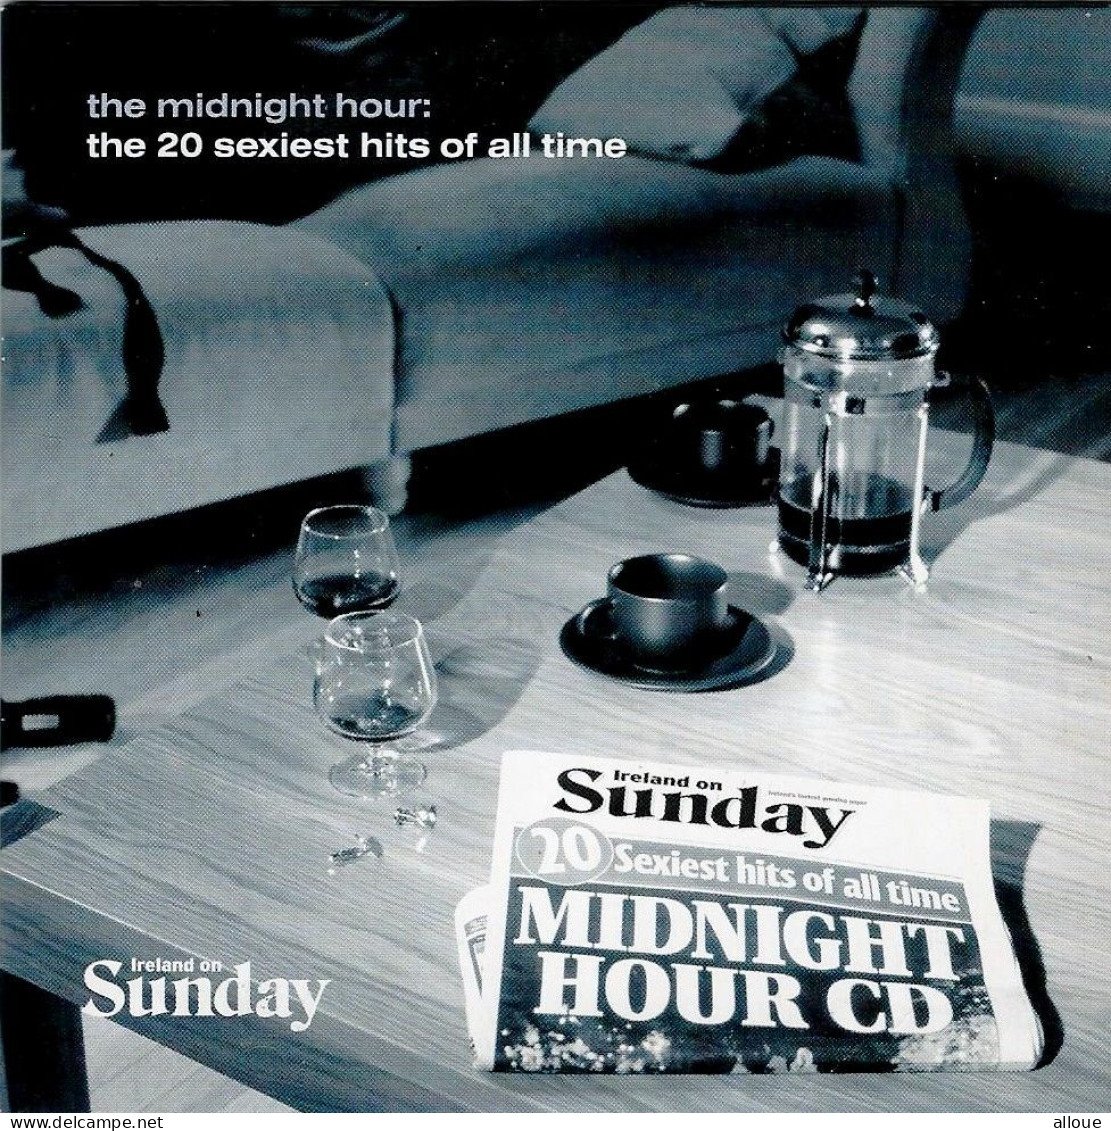 THE MIDNIGHT HOUR - CD IRELAND ON SUNDAY - POCHETTE CARTON 20 SEXIEST HITS OF ALL TIME-ELTON JOHN-MARVIN GAYE-INXS ETC. - Other - English Music